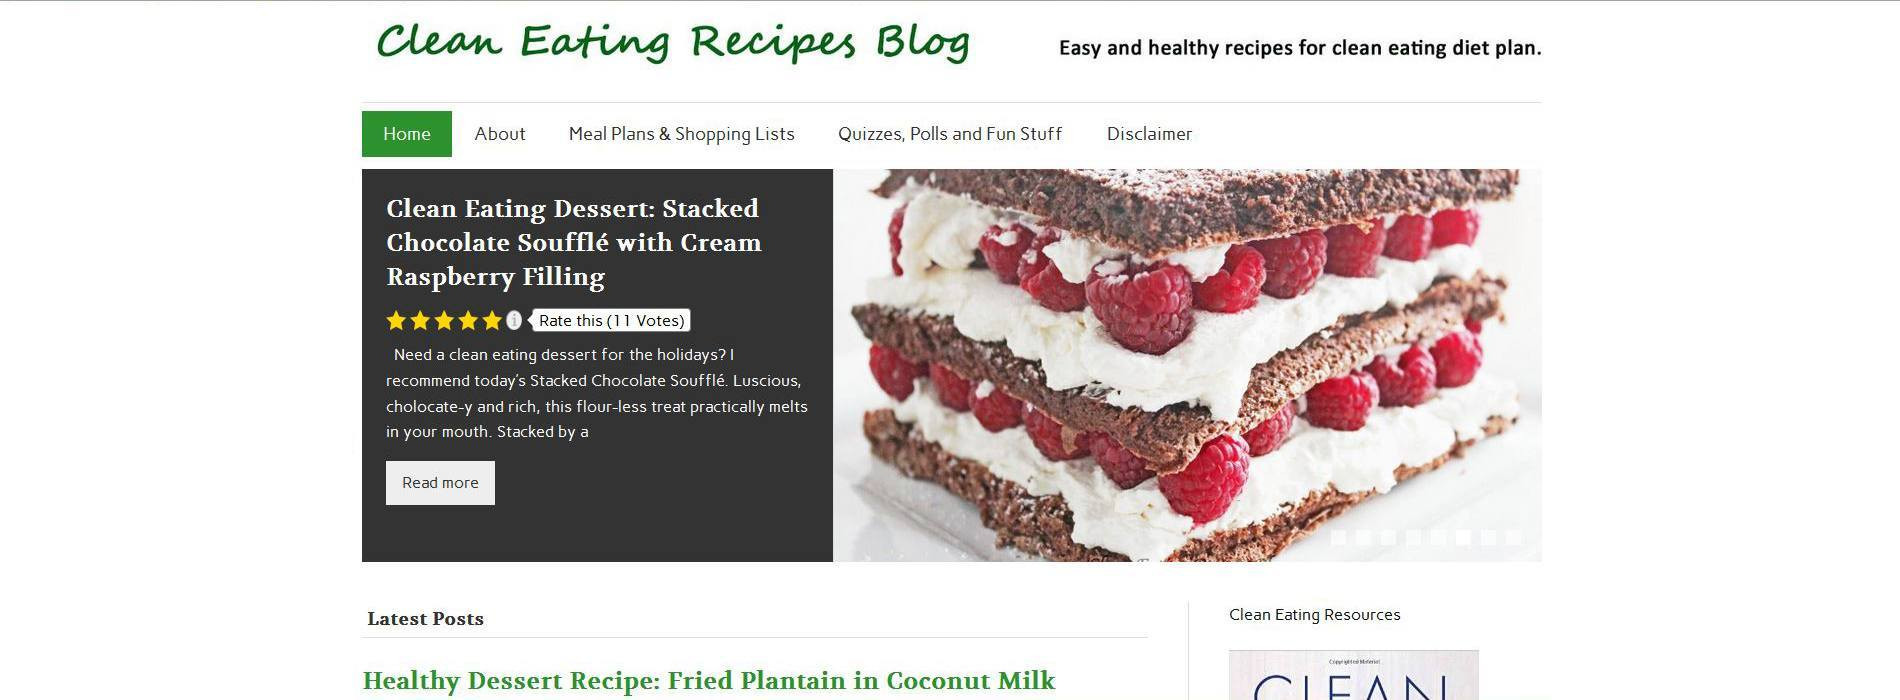 Clean Eating Recipe Blog
 Top 15 Clean Eating Bloggers to Follow in 2015